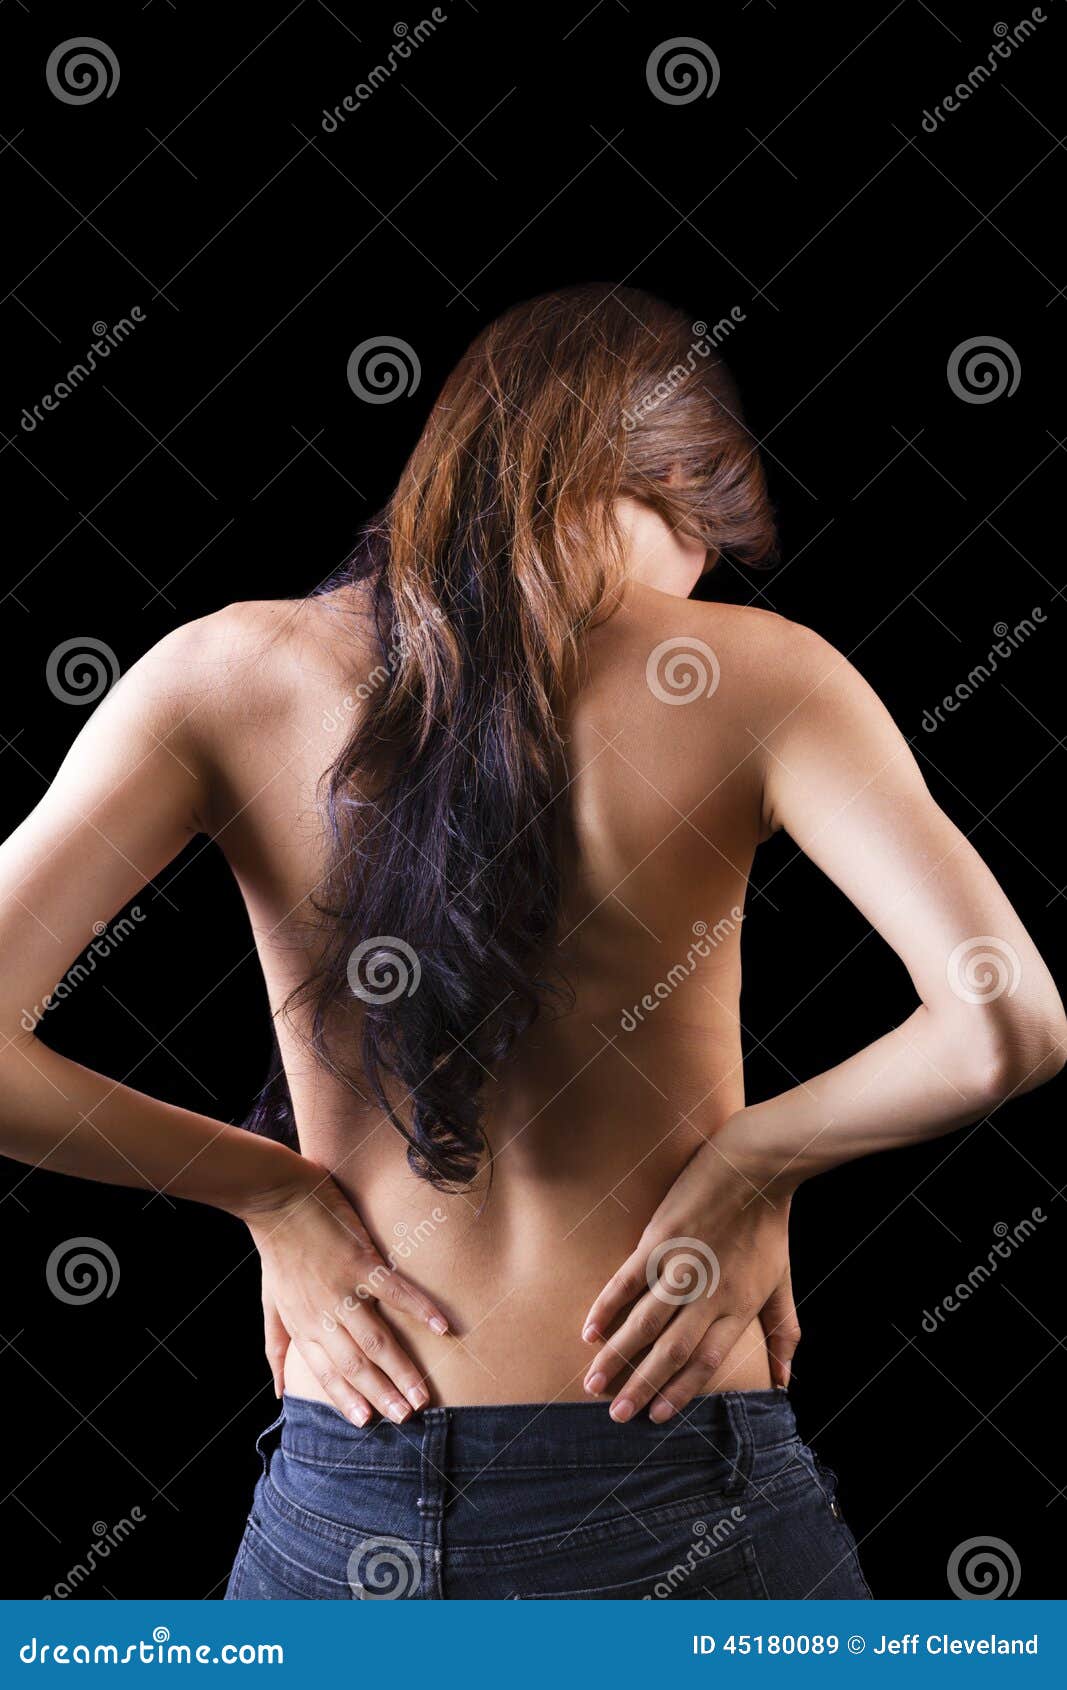 Skinny Hispanic Woman Hands on Bare Back Stock Image picture